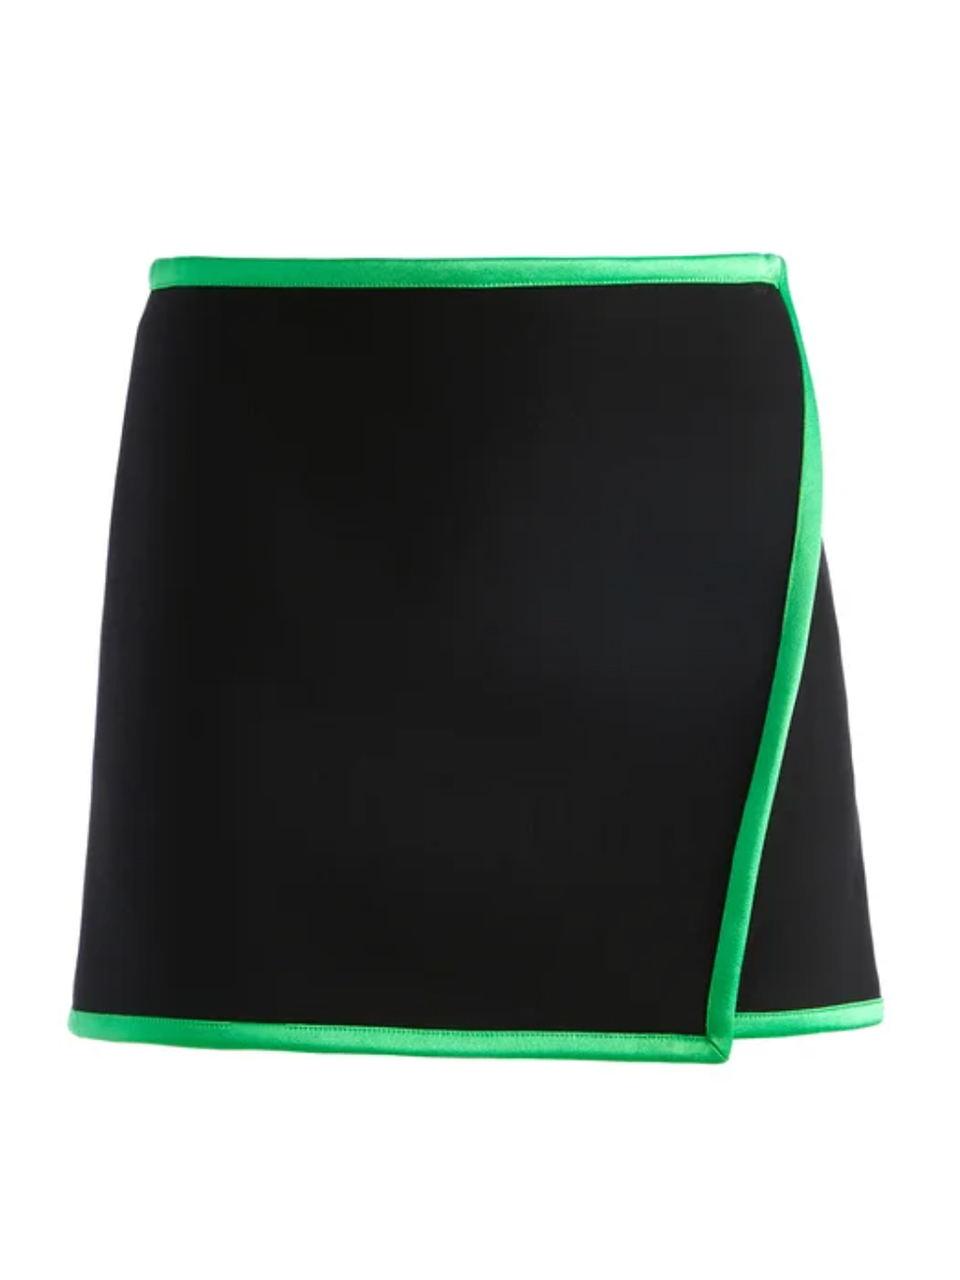 Alice + Olivia Lilia Piped Crossover Skirt in Black Garden Product Shot 